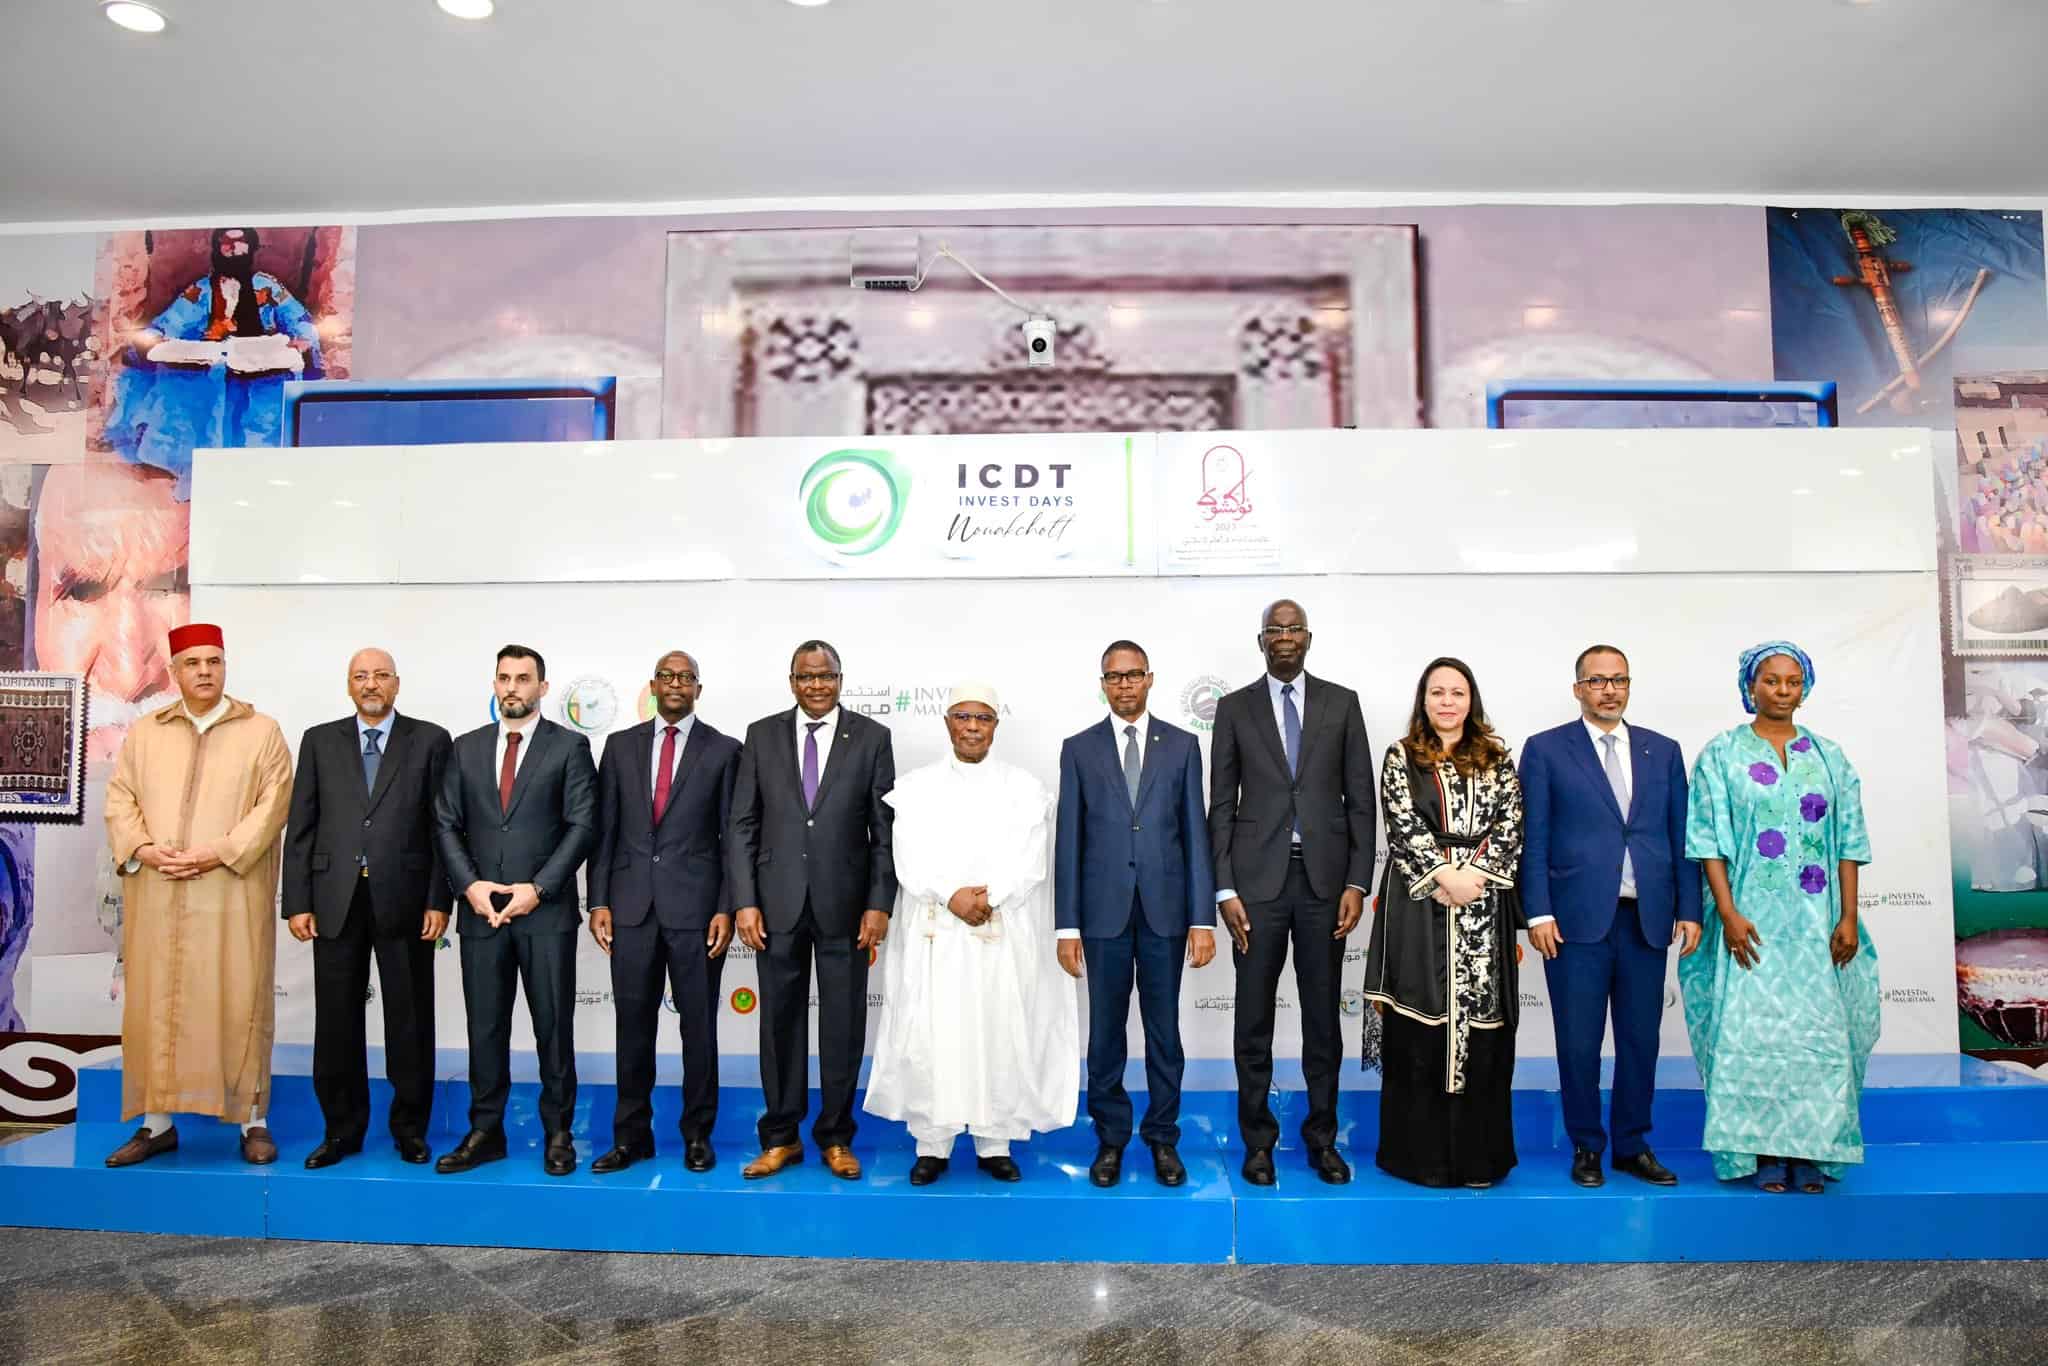 “ICDT-Invest Days Nouakchott”: is More than 500 attendees, 60 investors, 6 Business rooms